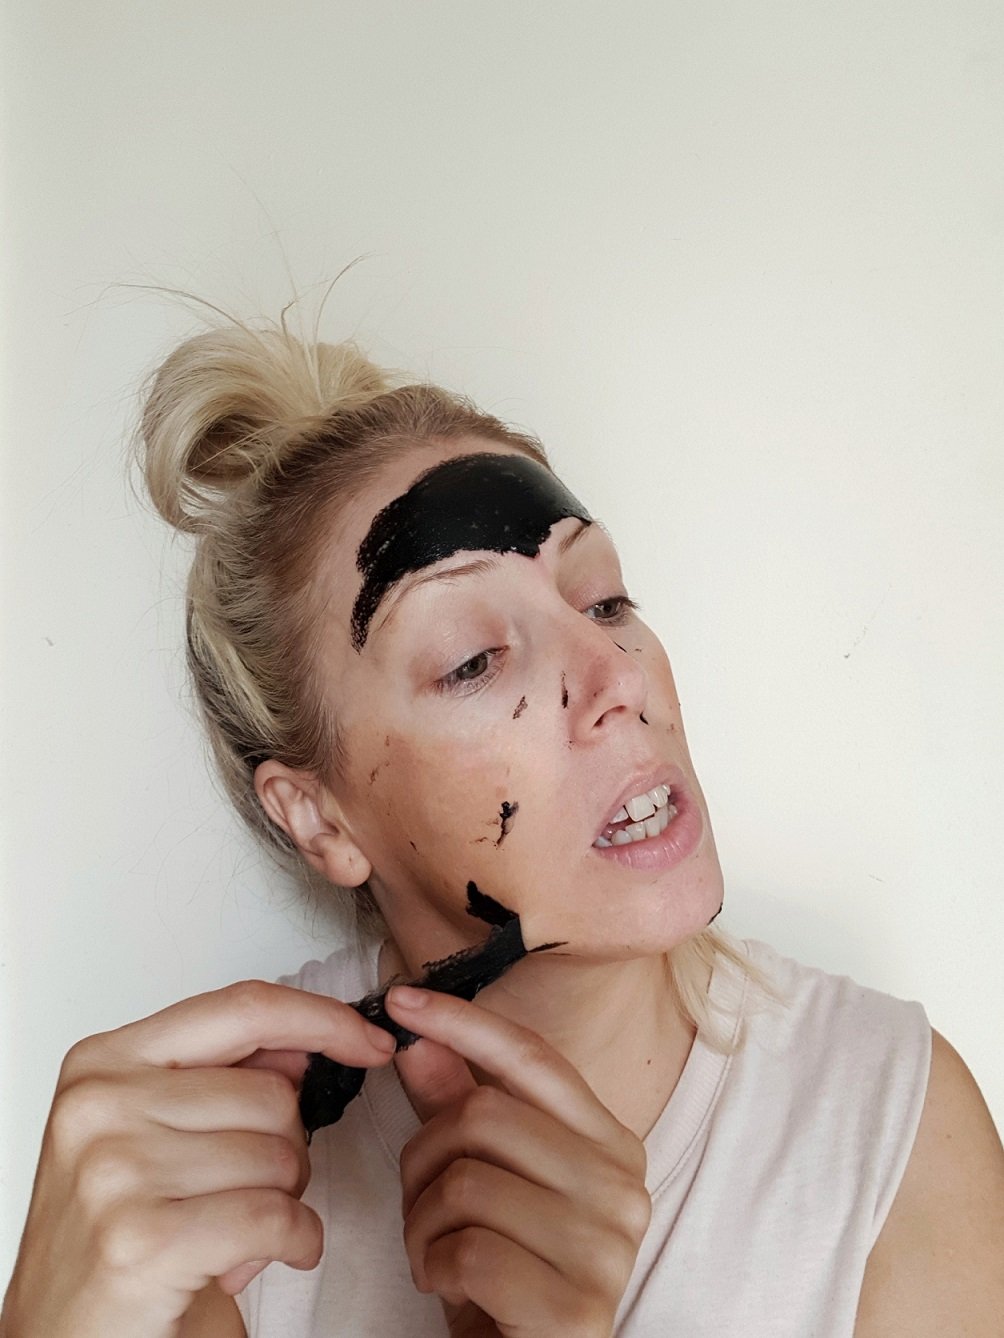 Charcoal Rescue Peel-Off Removal Mask Review | Style & Life by Susana